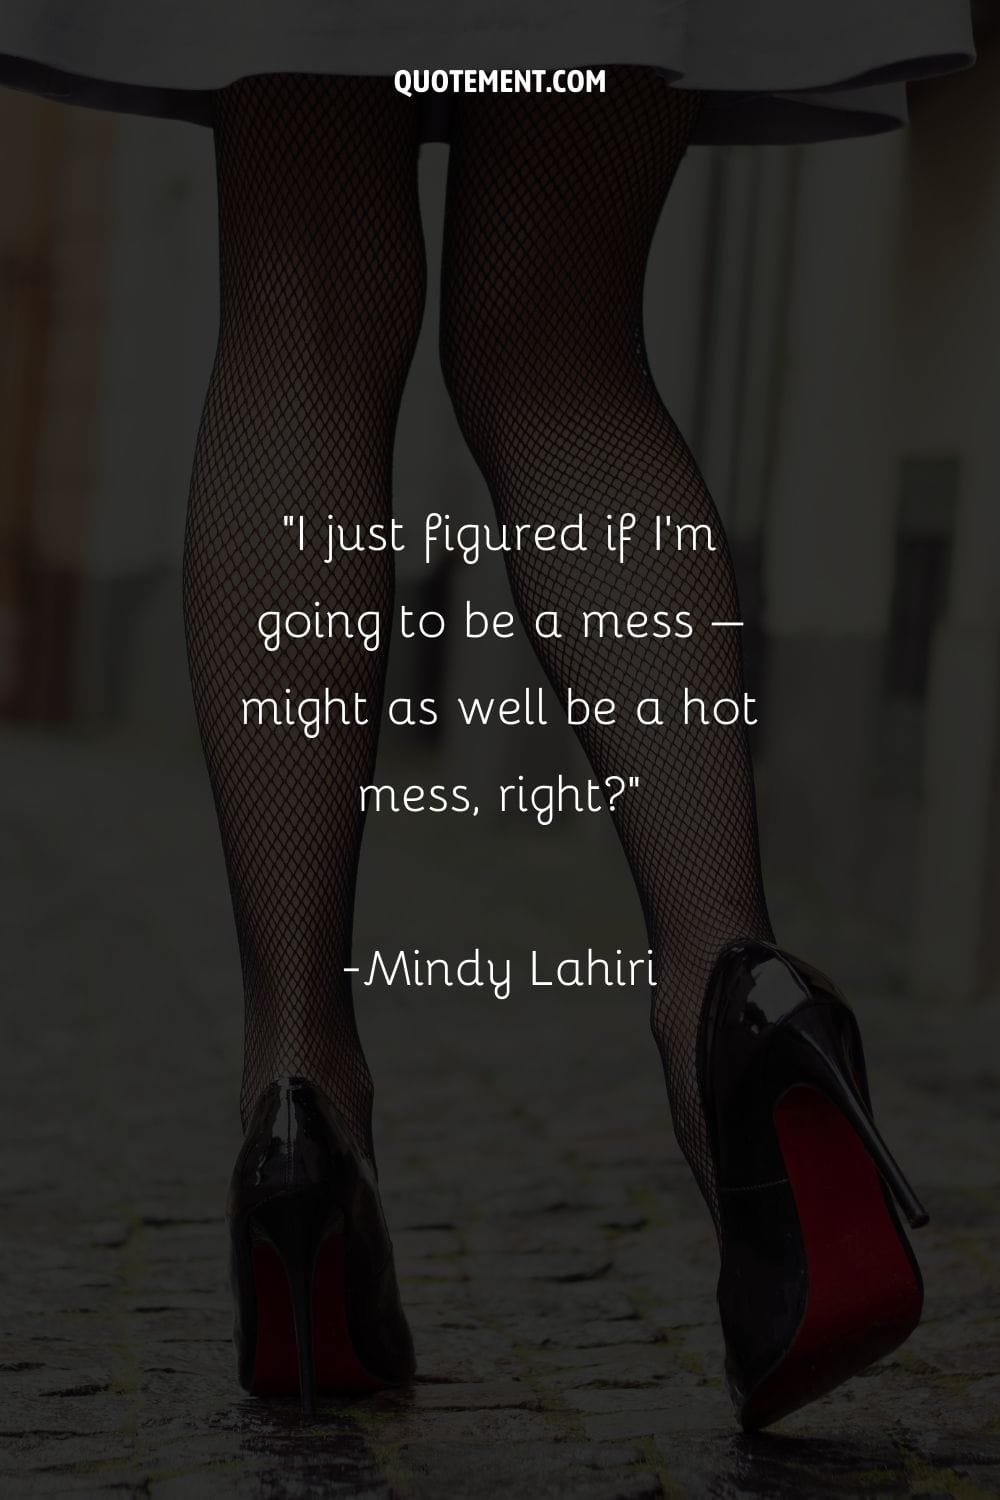 Image of a woman wearing black heels representing sassy confident quote.